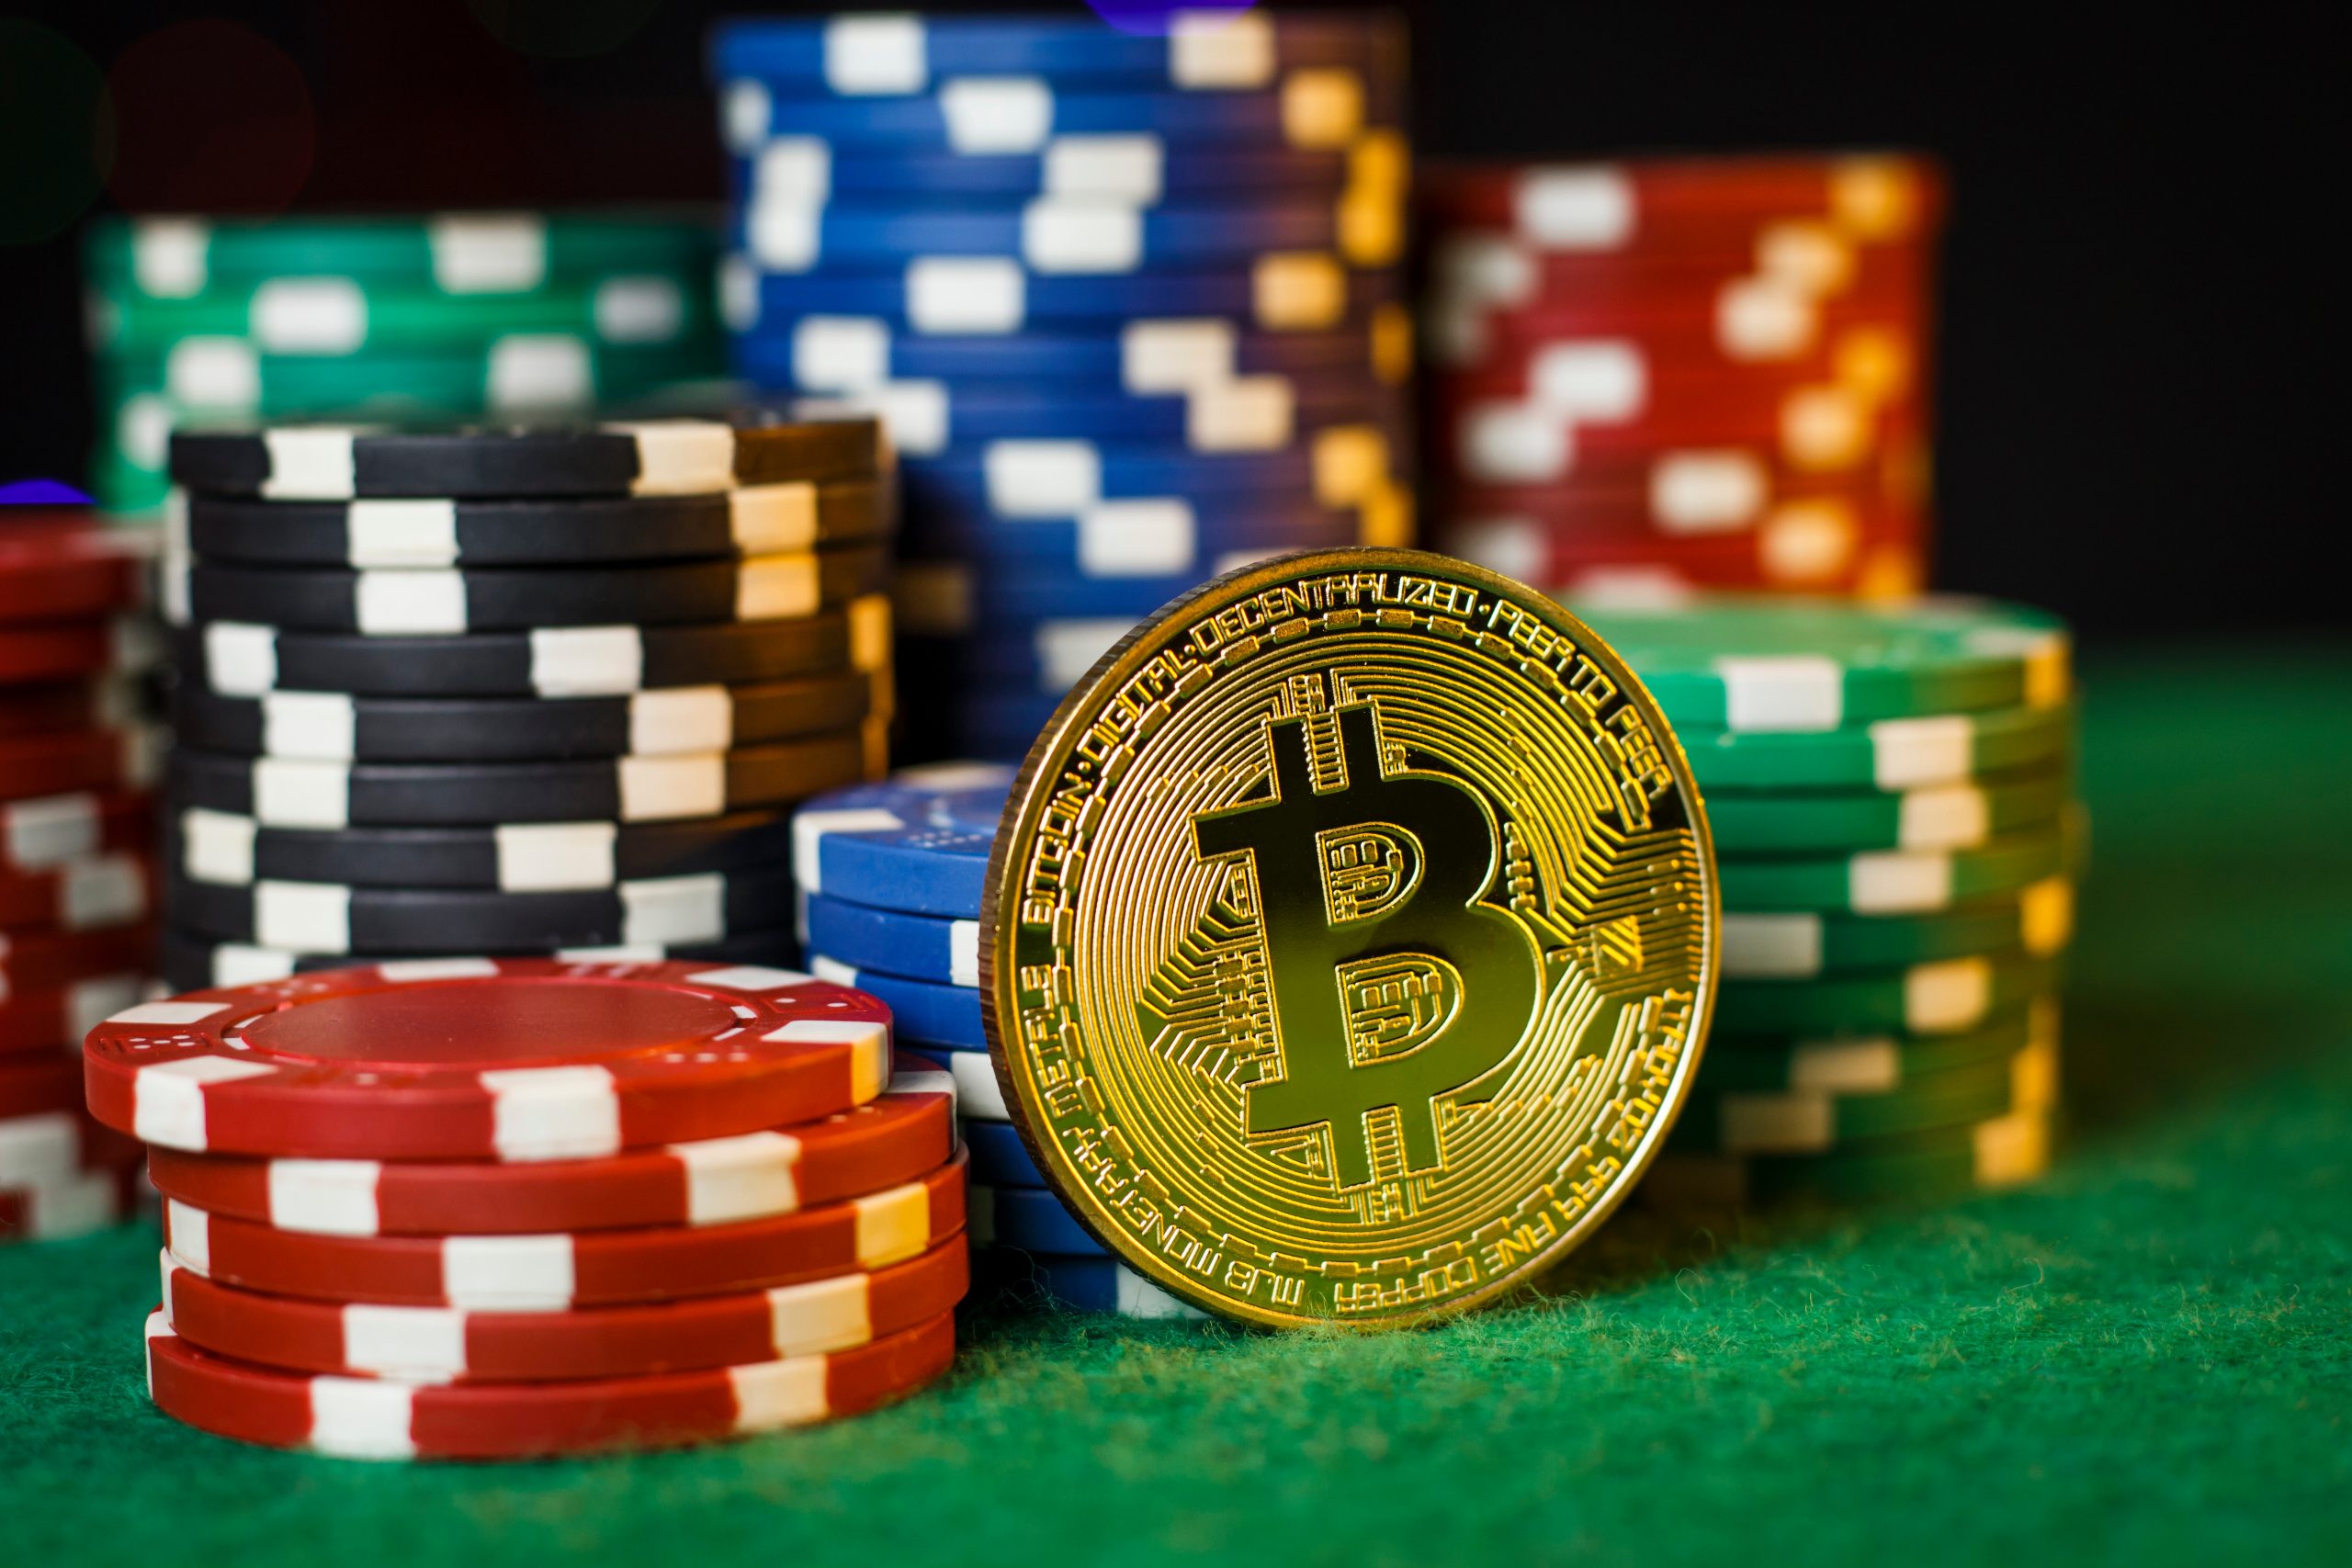 Bitcoin gold coin on the poker table with chips Casino